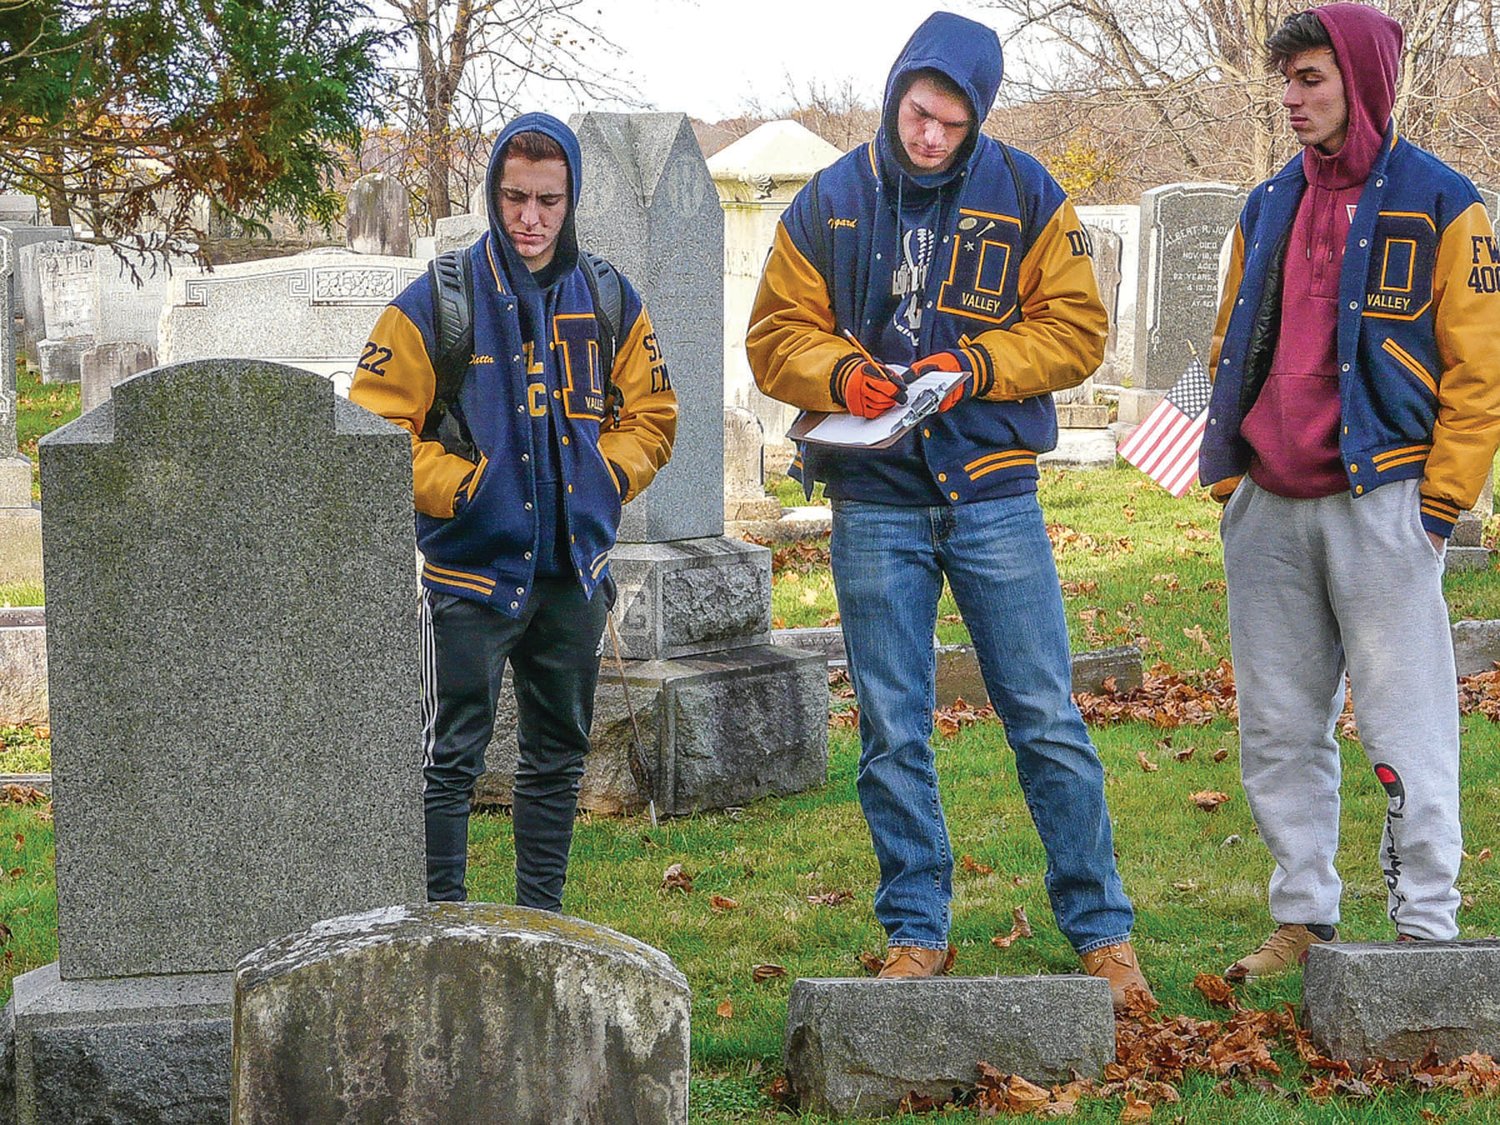 Harvesting data in the Rosemont Cemetery are, from left, Nicolas DiBetta, Jake Norgard and Alejandro Silva. The exercise is called a “cemetery lab.”